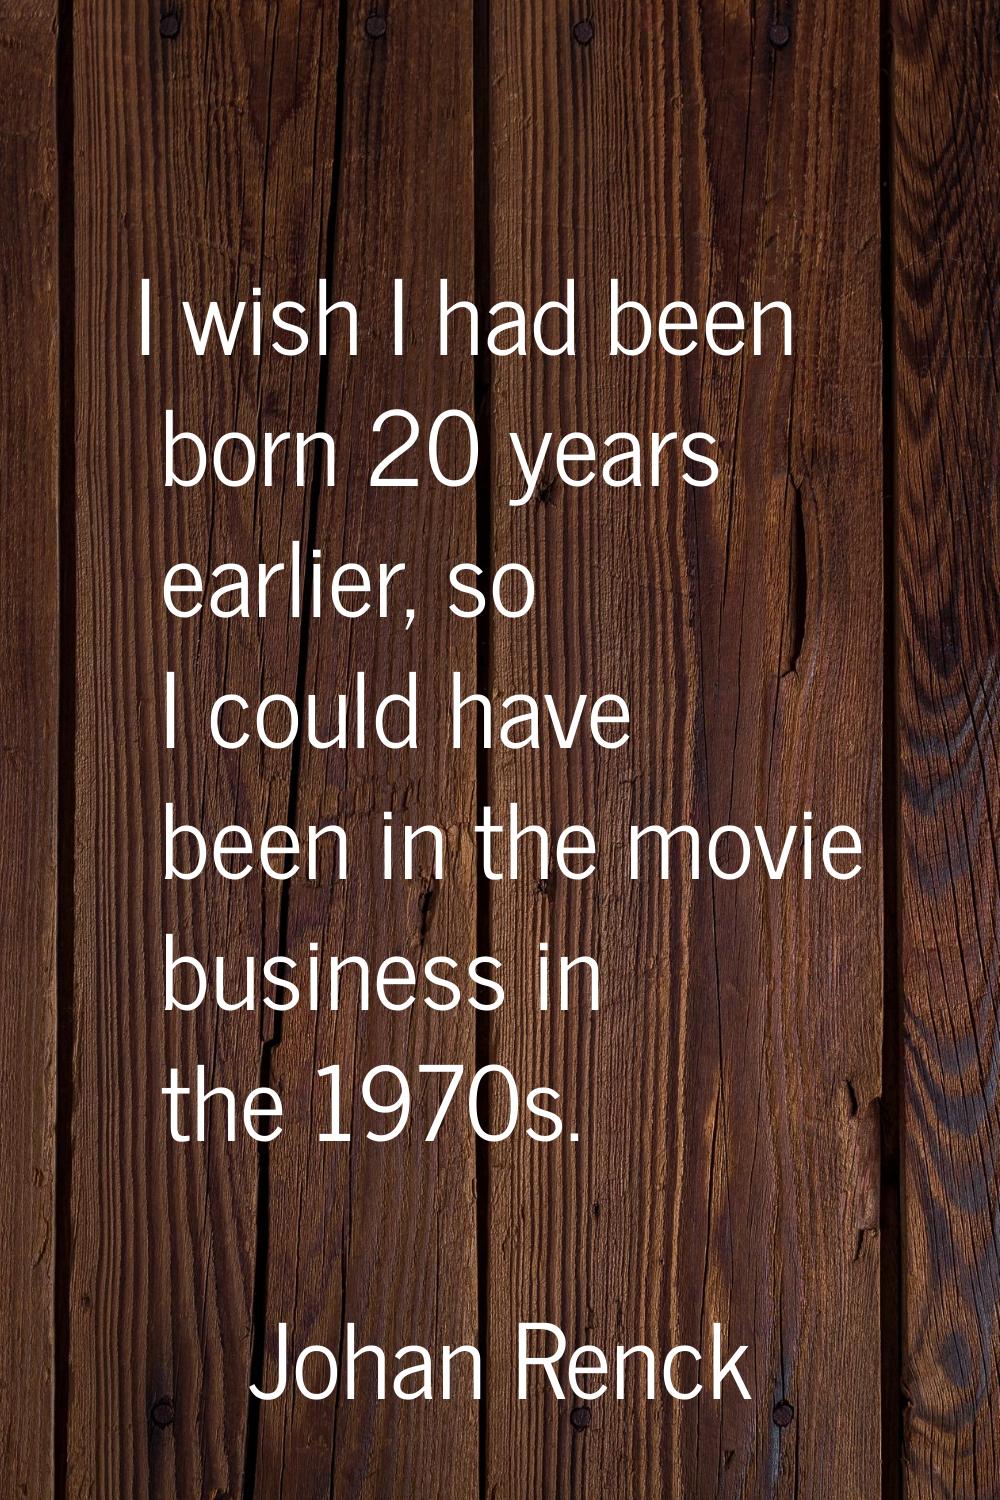 I wish I had been born 20 years earlier, so I could have been in the movie business in the 1970s.